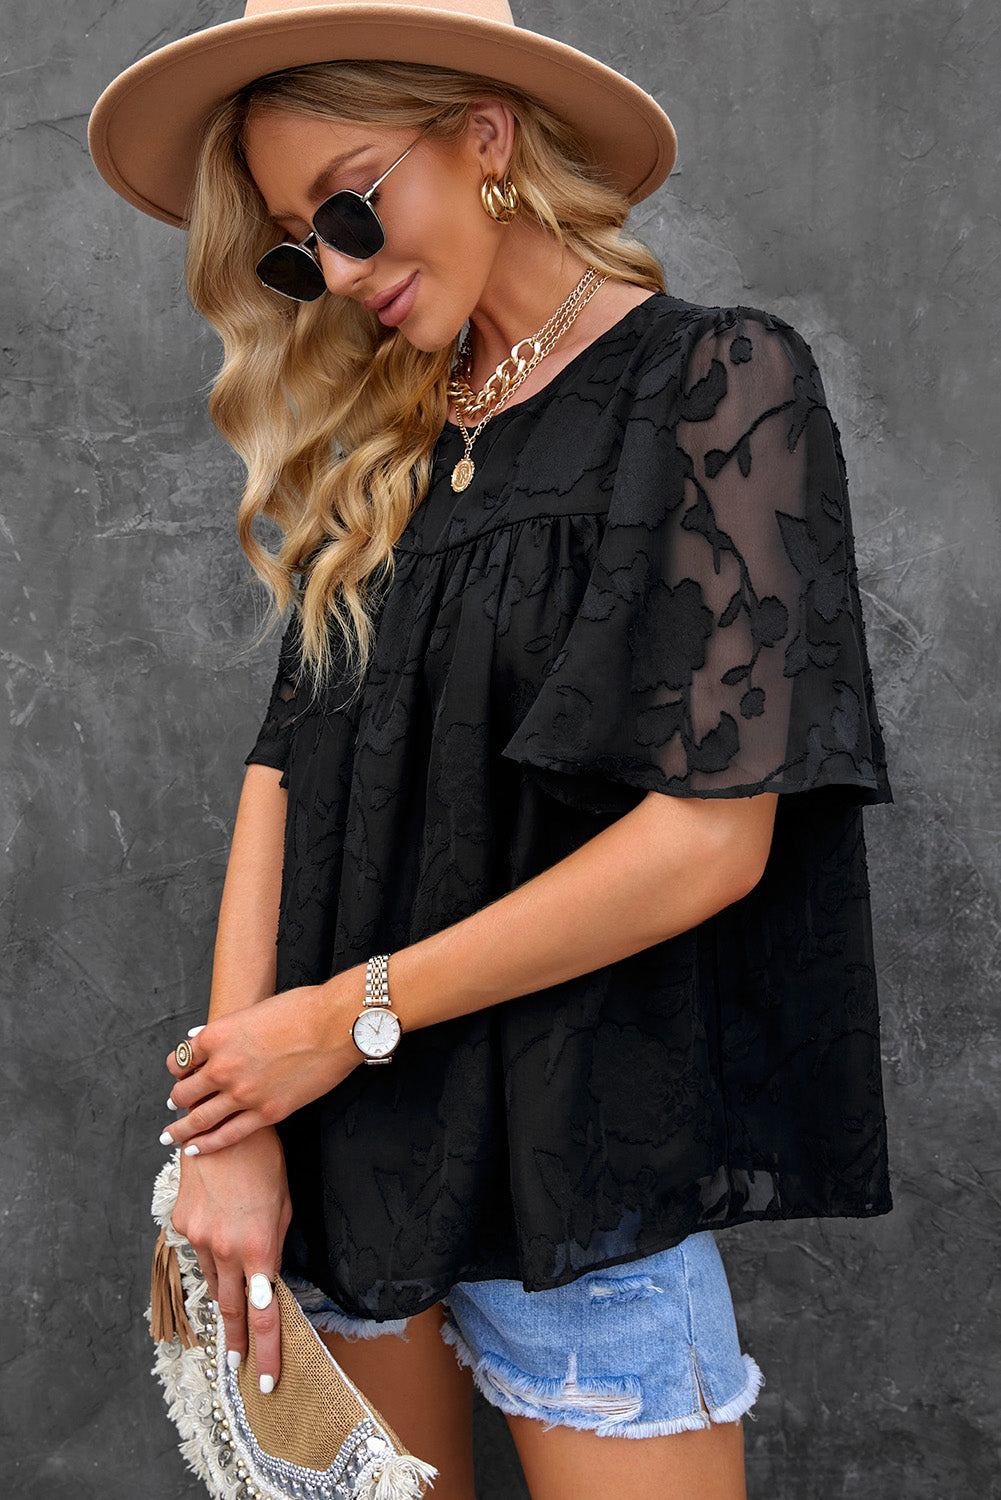 Round Neck Puff Sleeve Blouse (11 Colors)  Krazy Heart Designs Boutique   